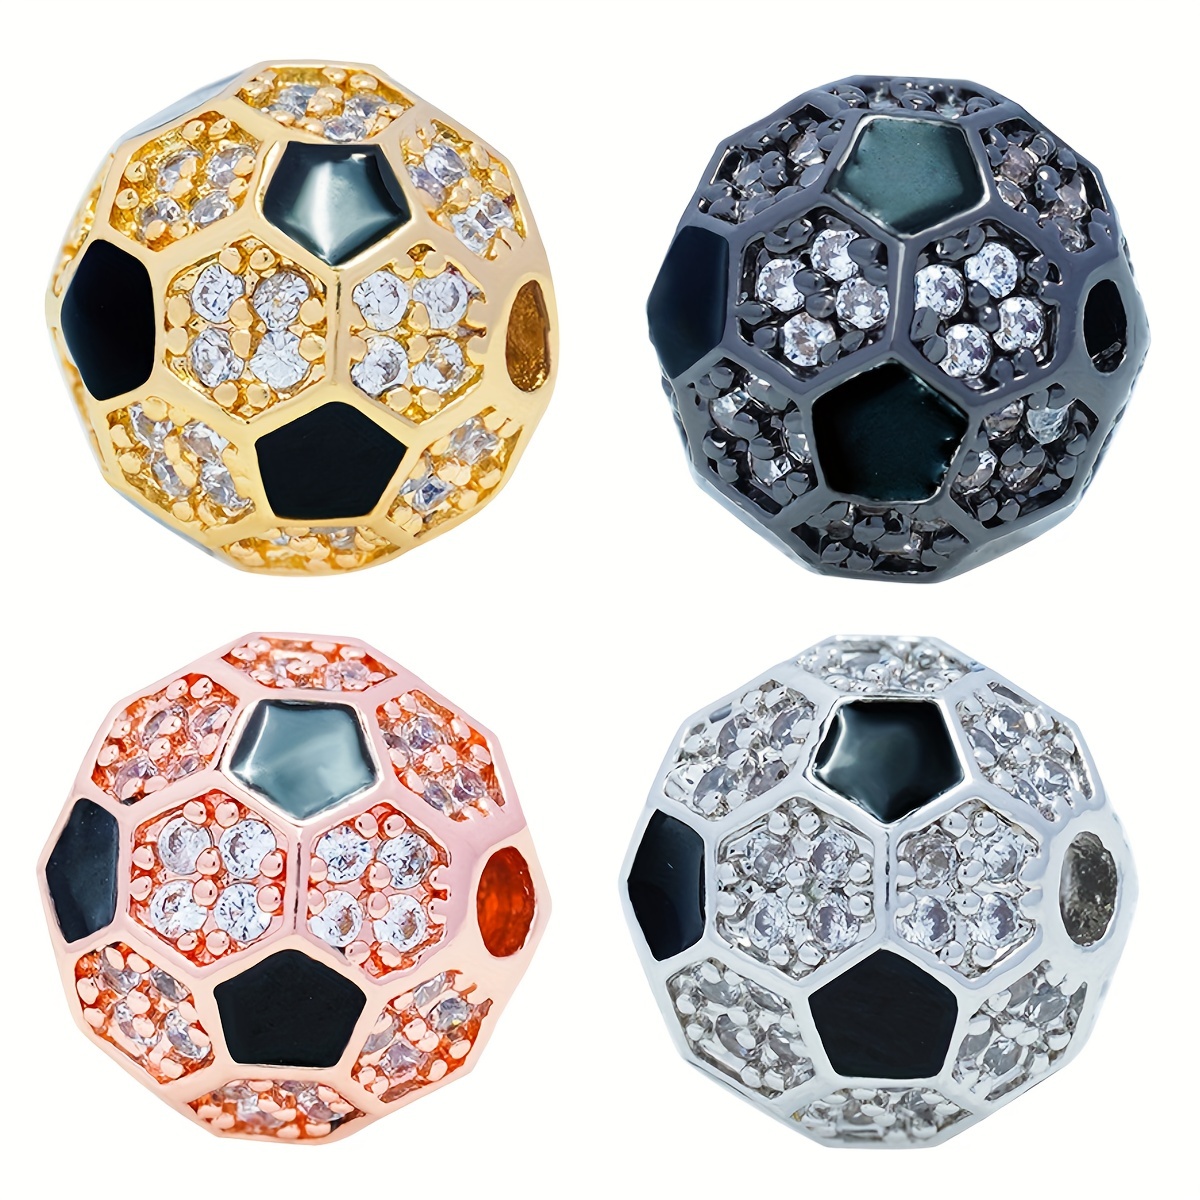 14mm Pewter Football Bead - 4 Pack – Beads, Inc.